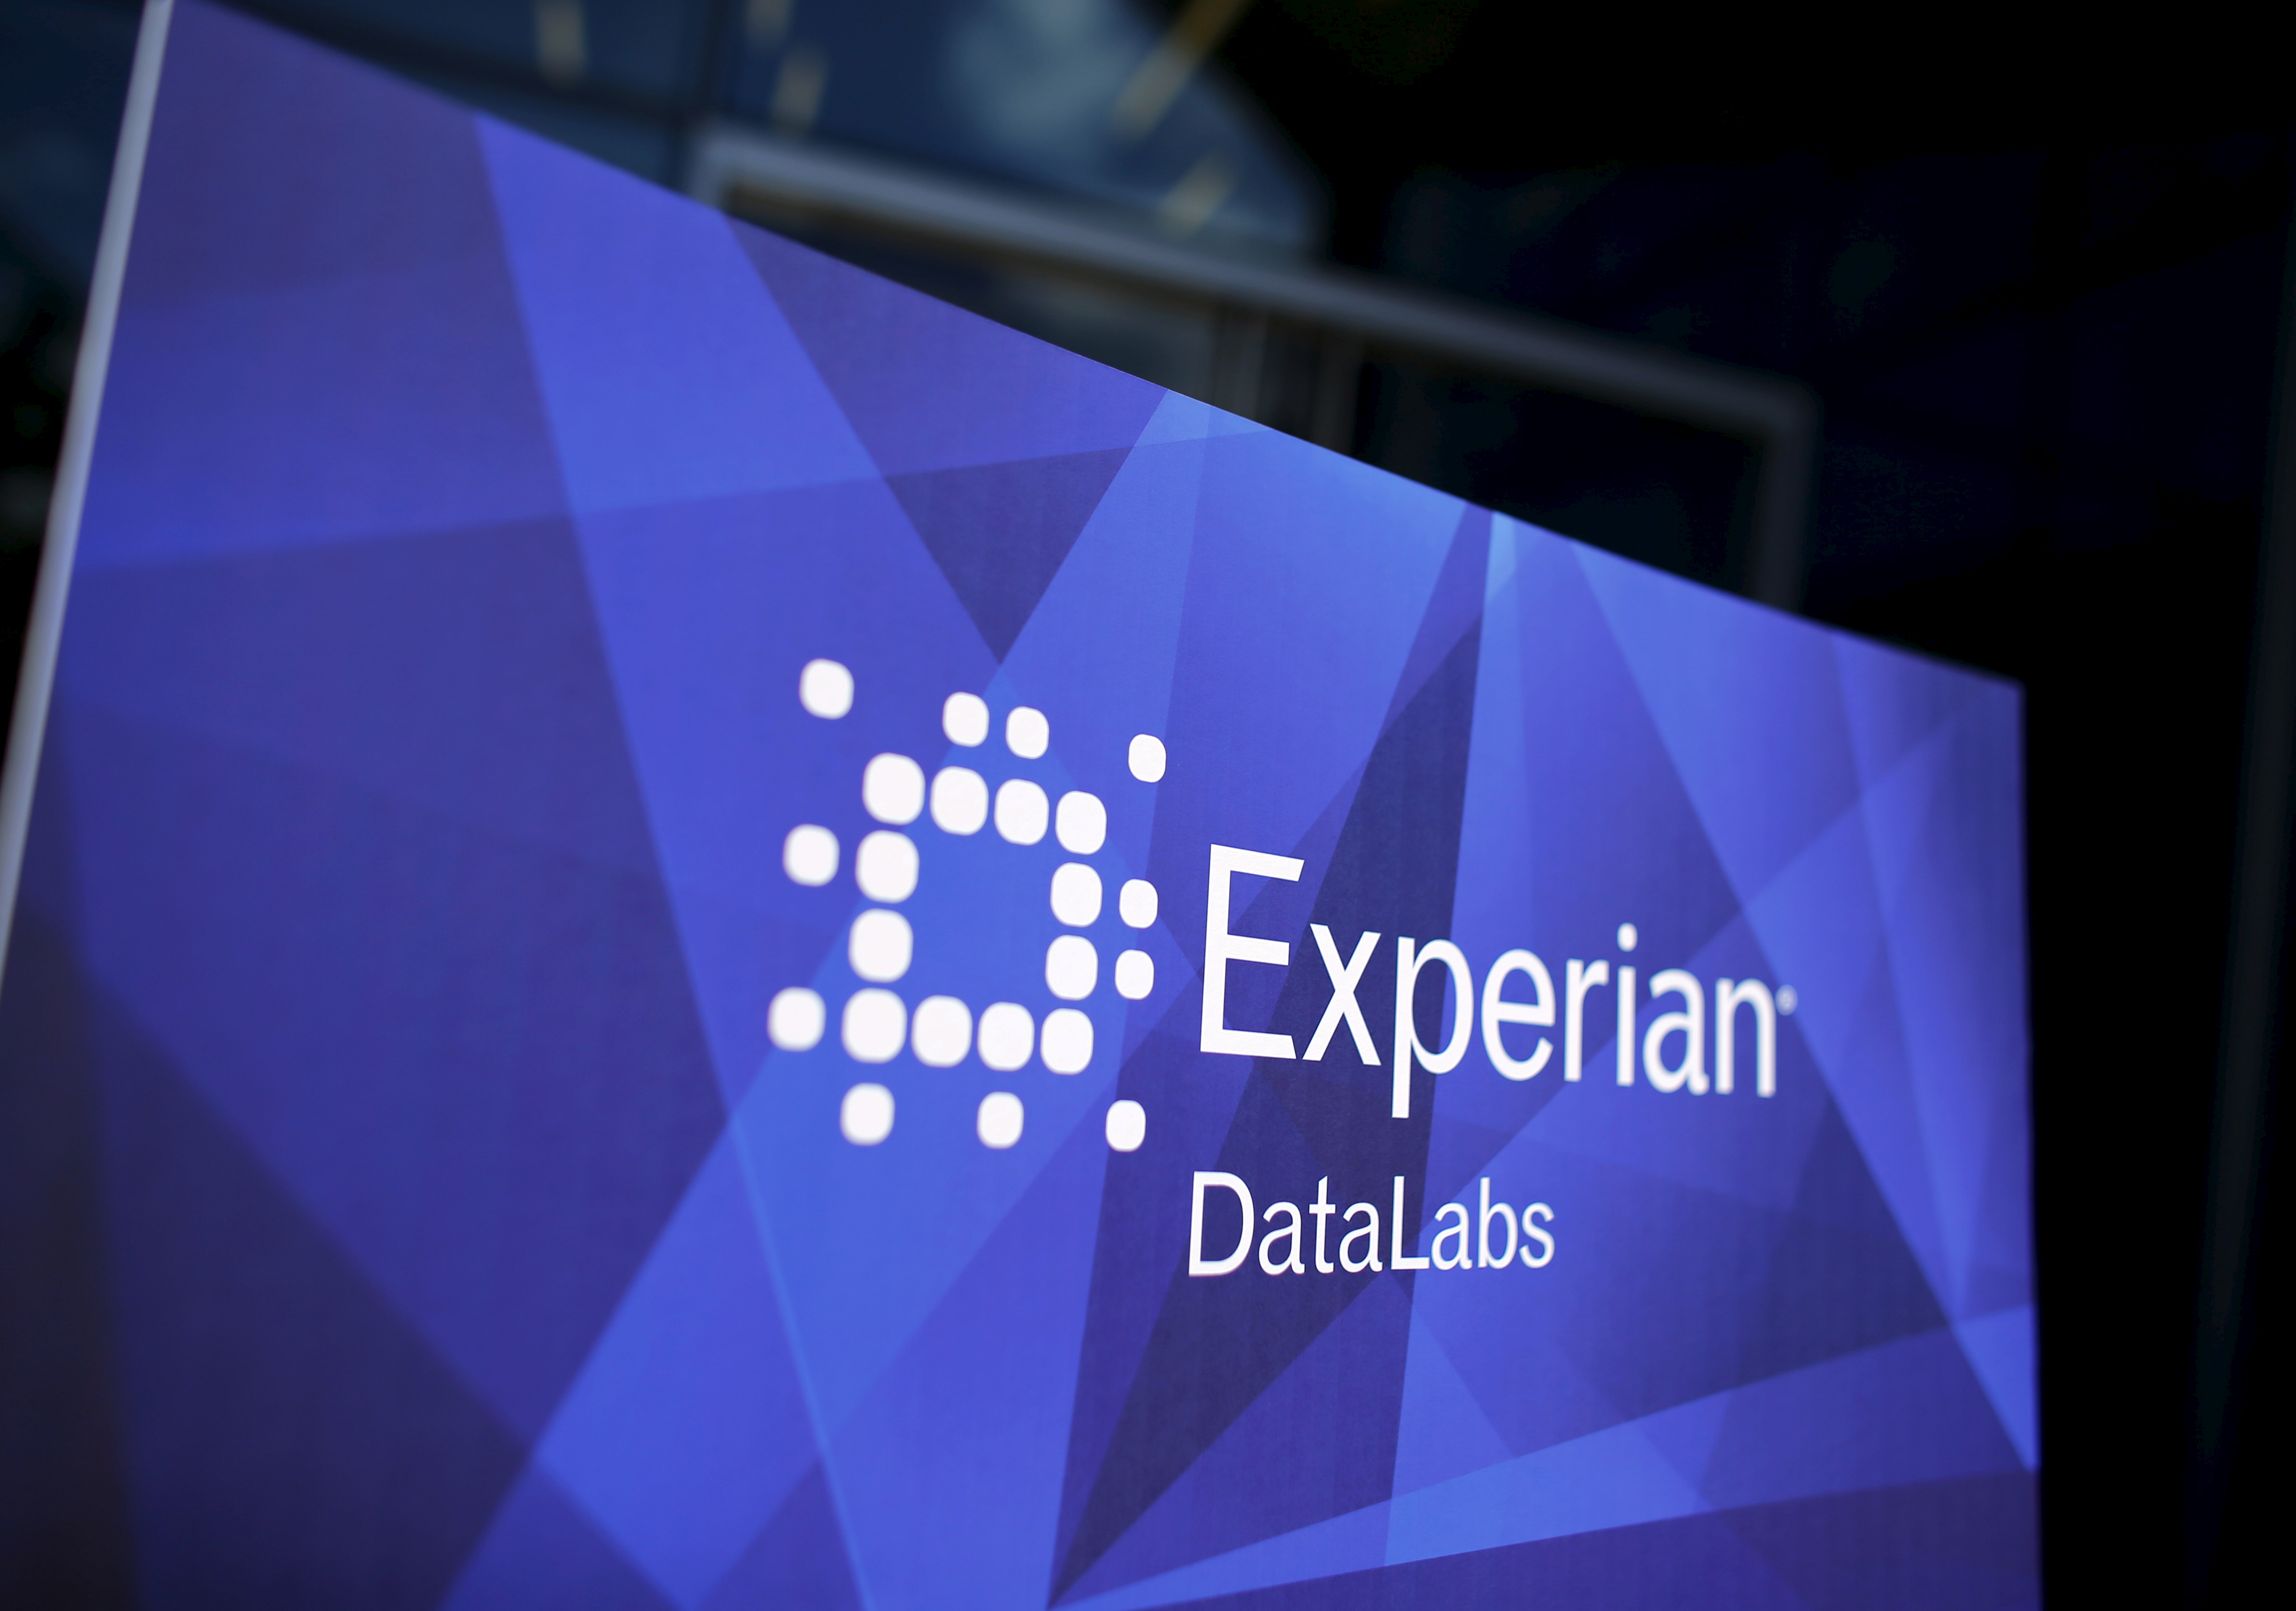 The corporate logo of information services company Experian is seen at the opening of its data lab in San Diego